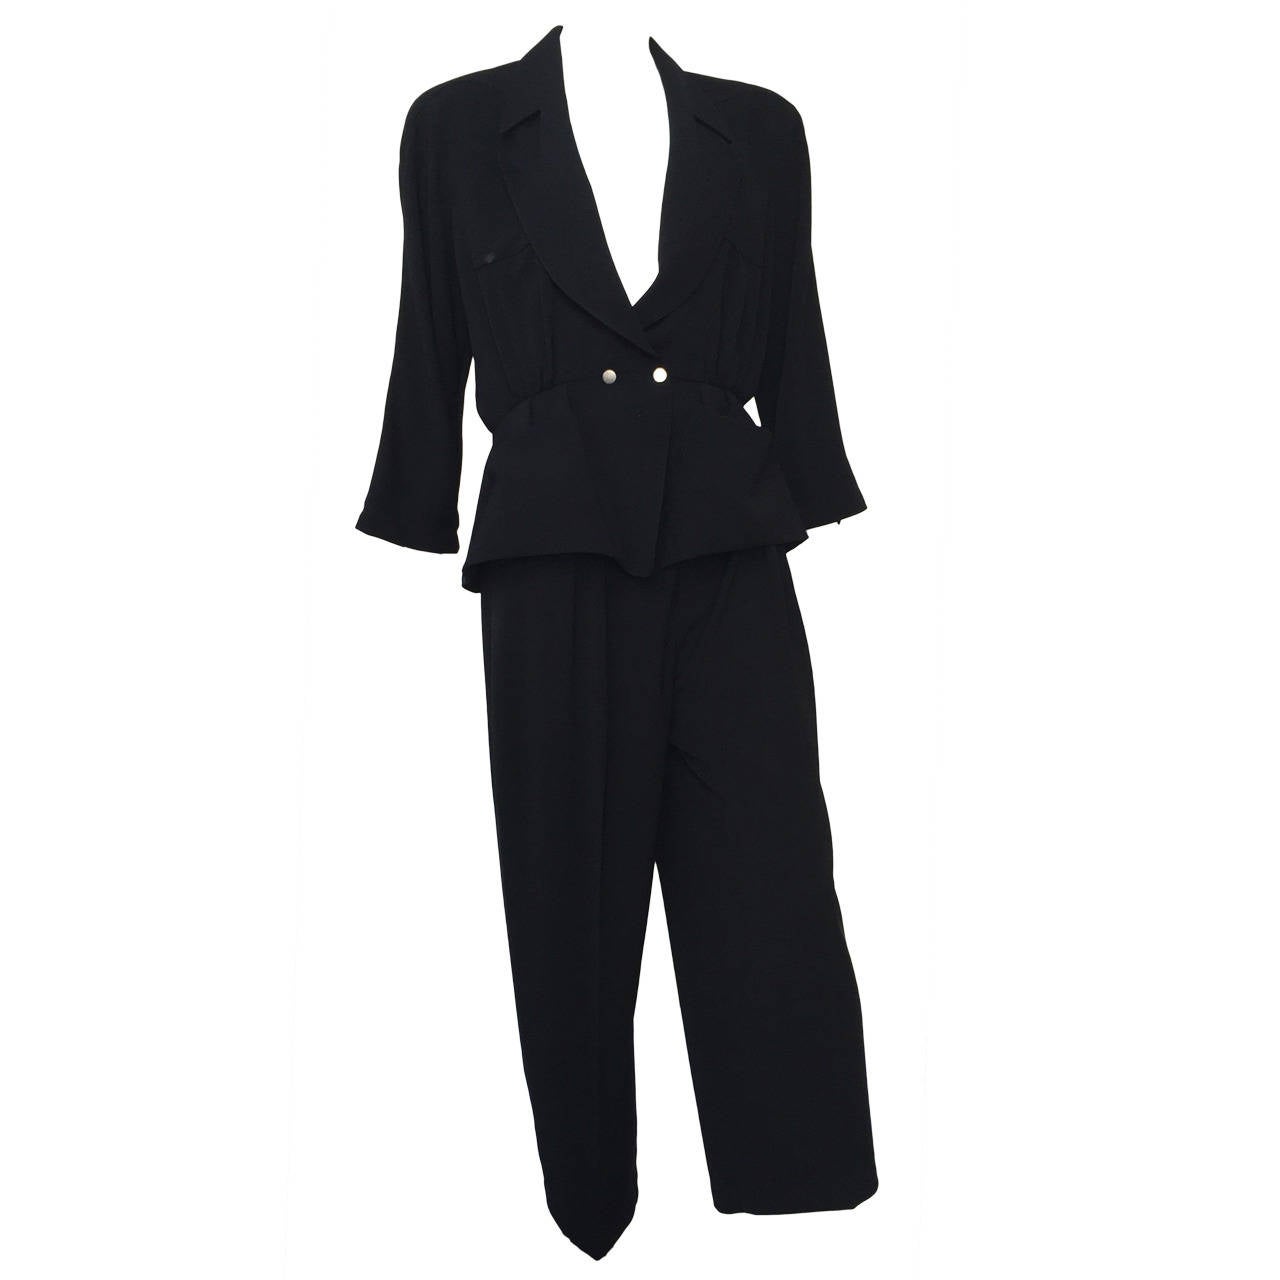 Thierry Mugler Black Pant Suit Size 8/10. For Sale